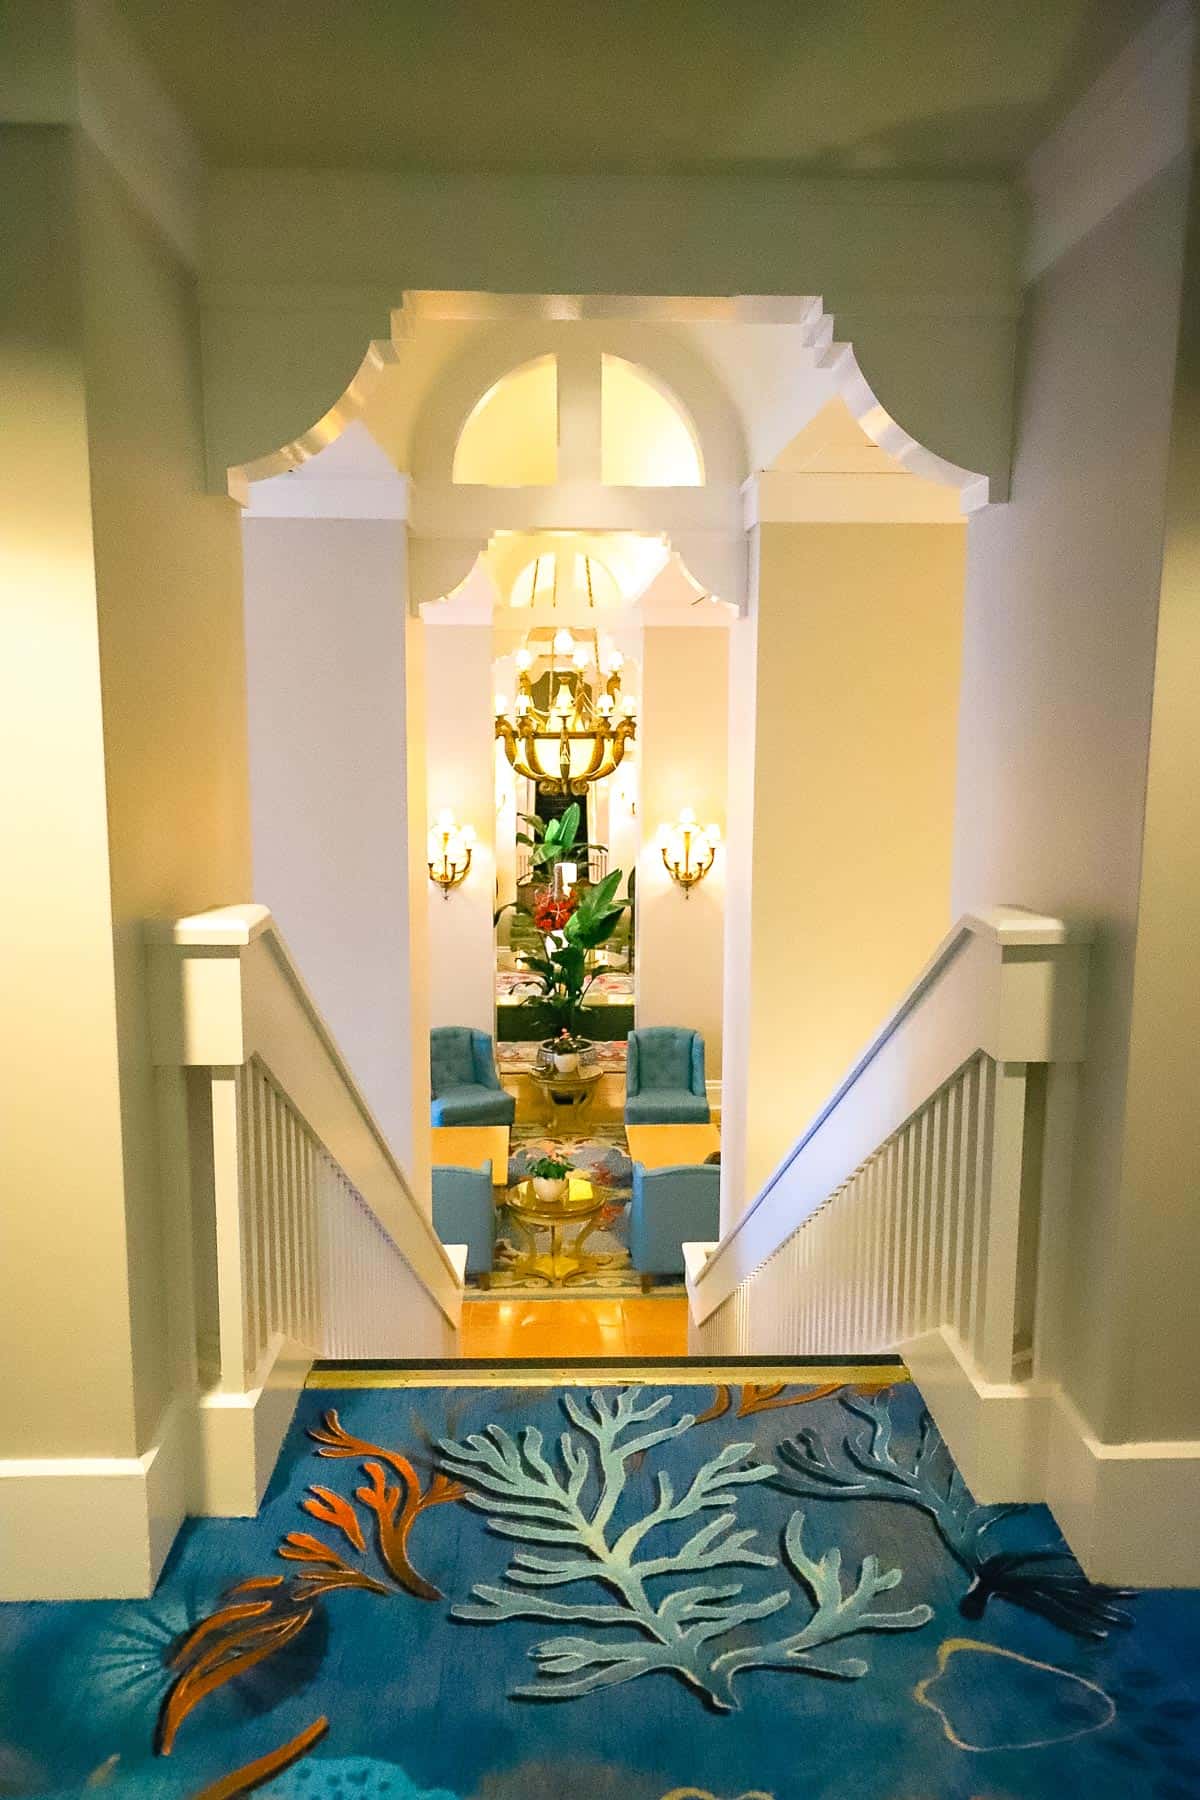 Looking down the stairs to the former lobby design at Disney's Beach Club 